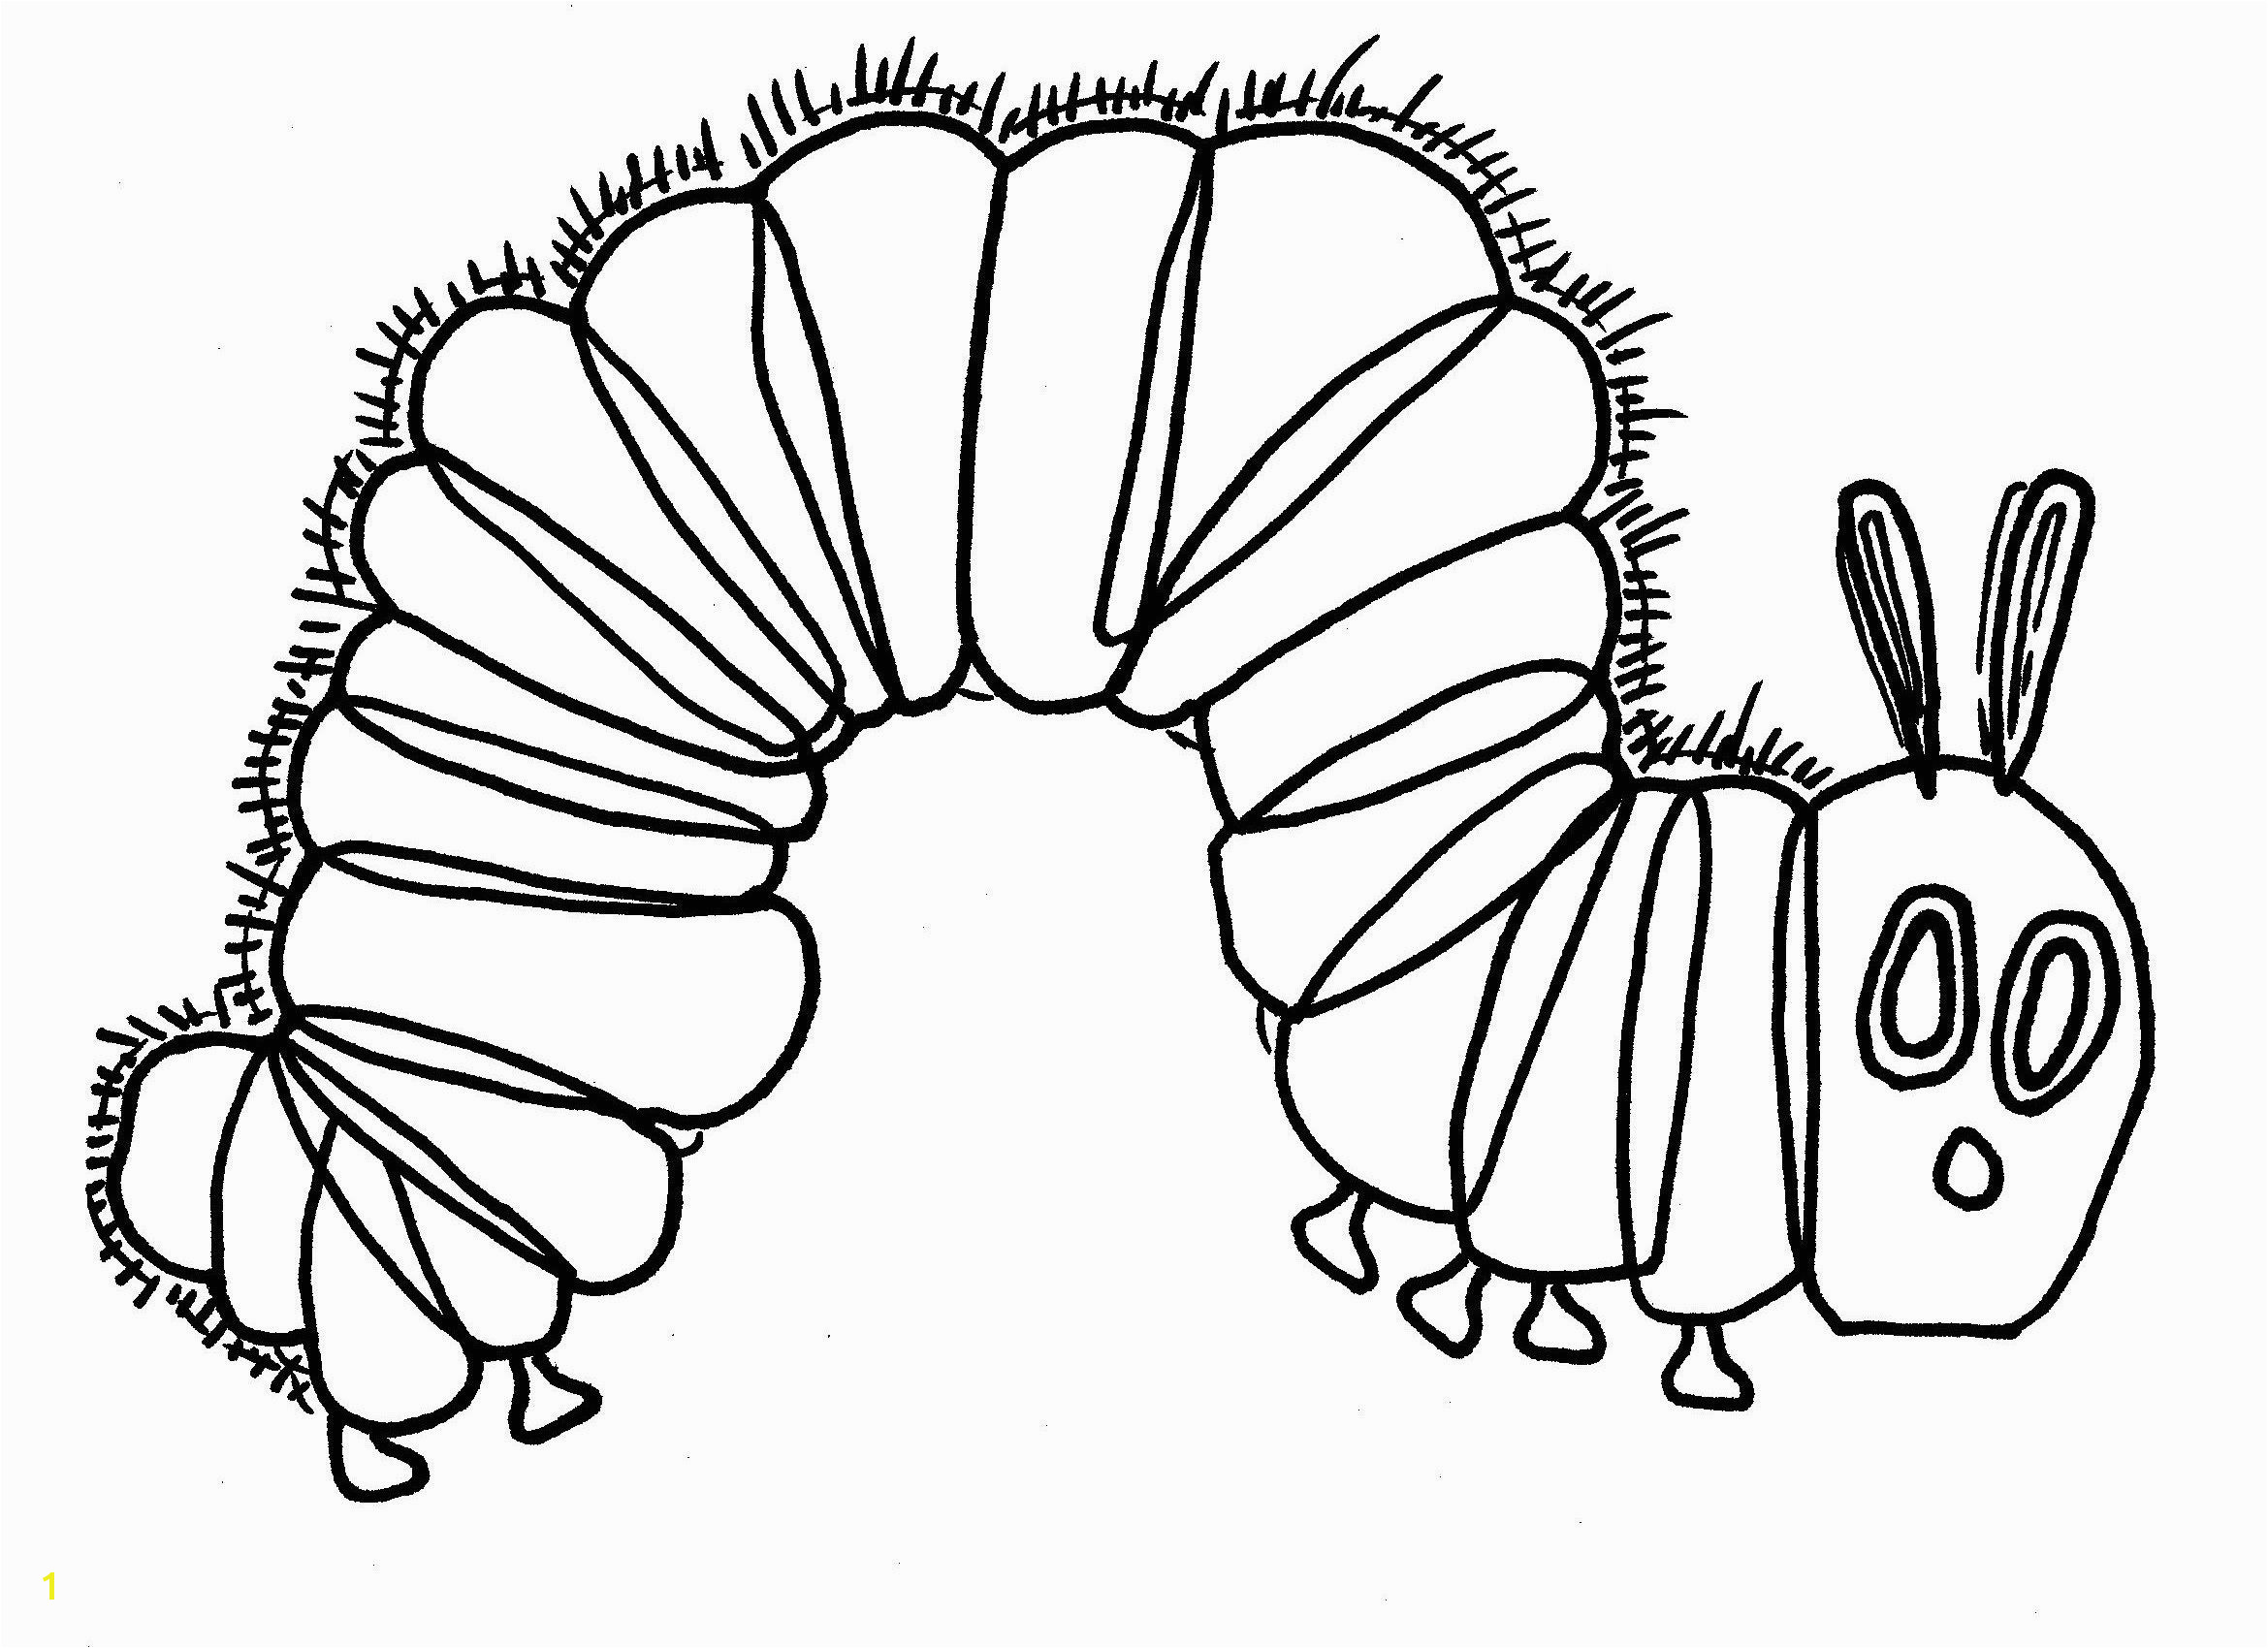 Hungry Caterpillar Art and Coloring Page